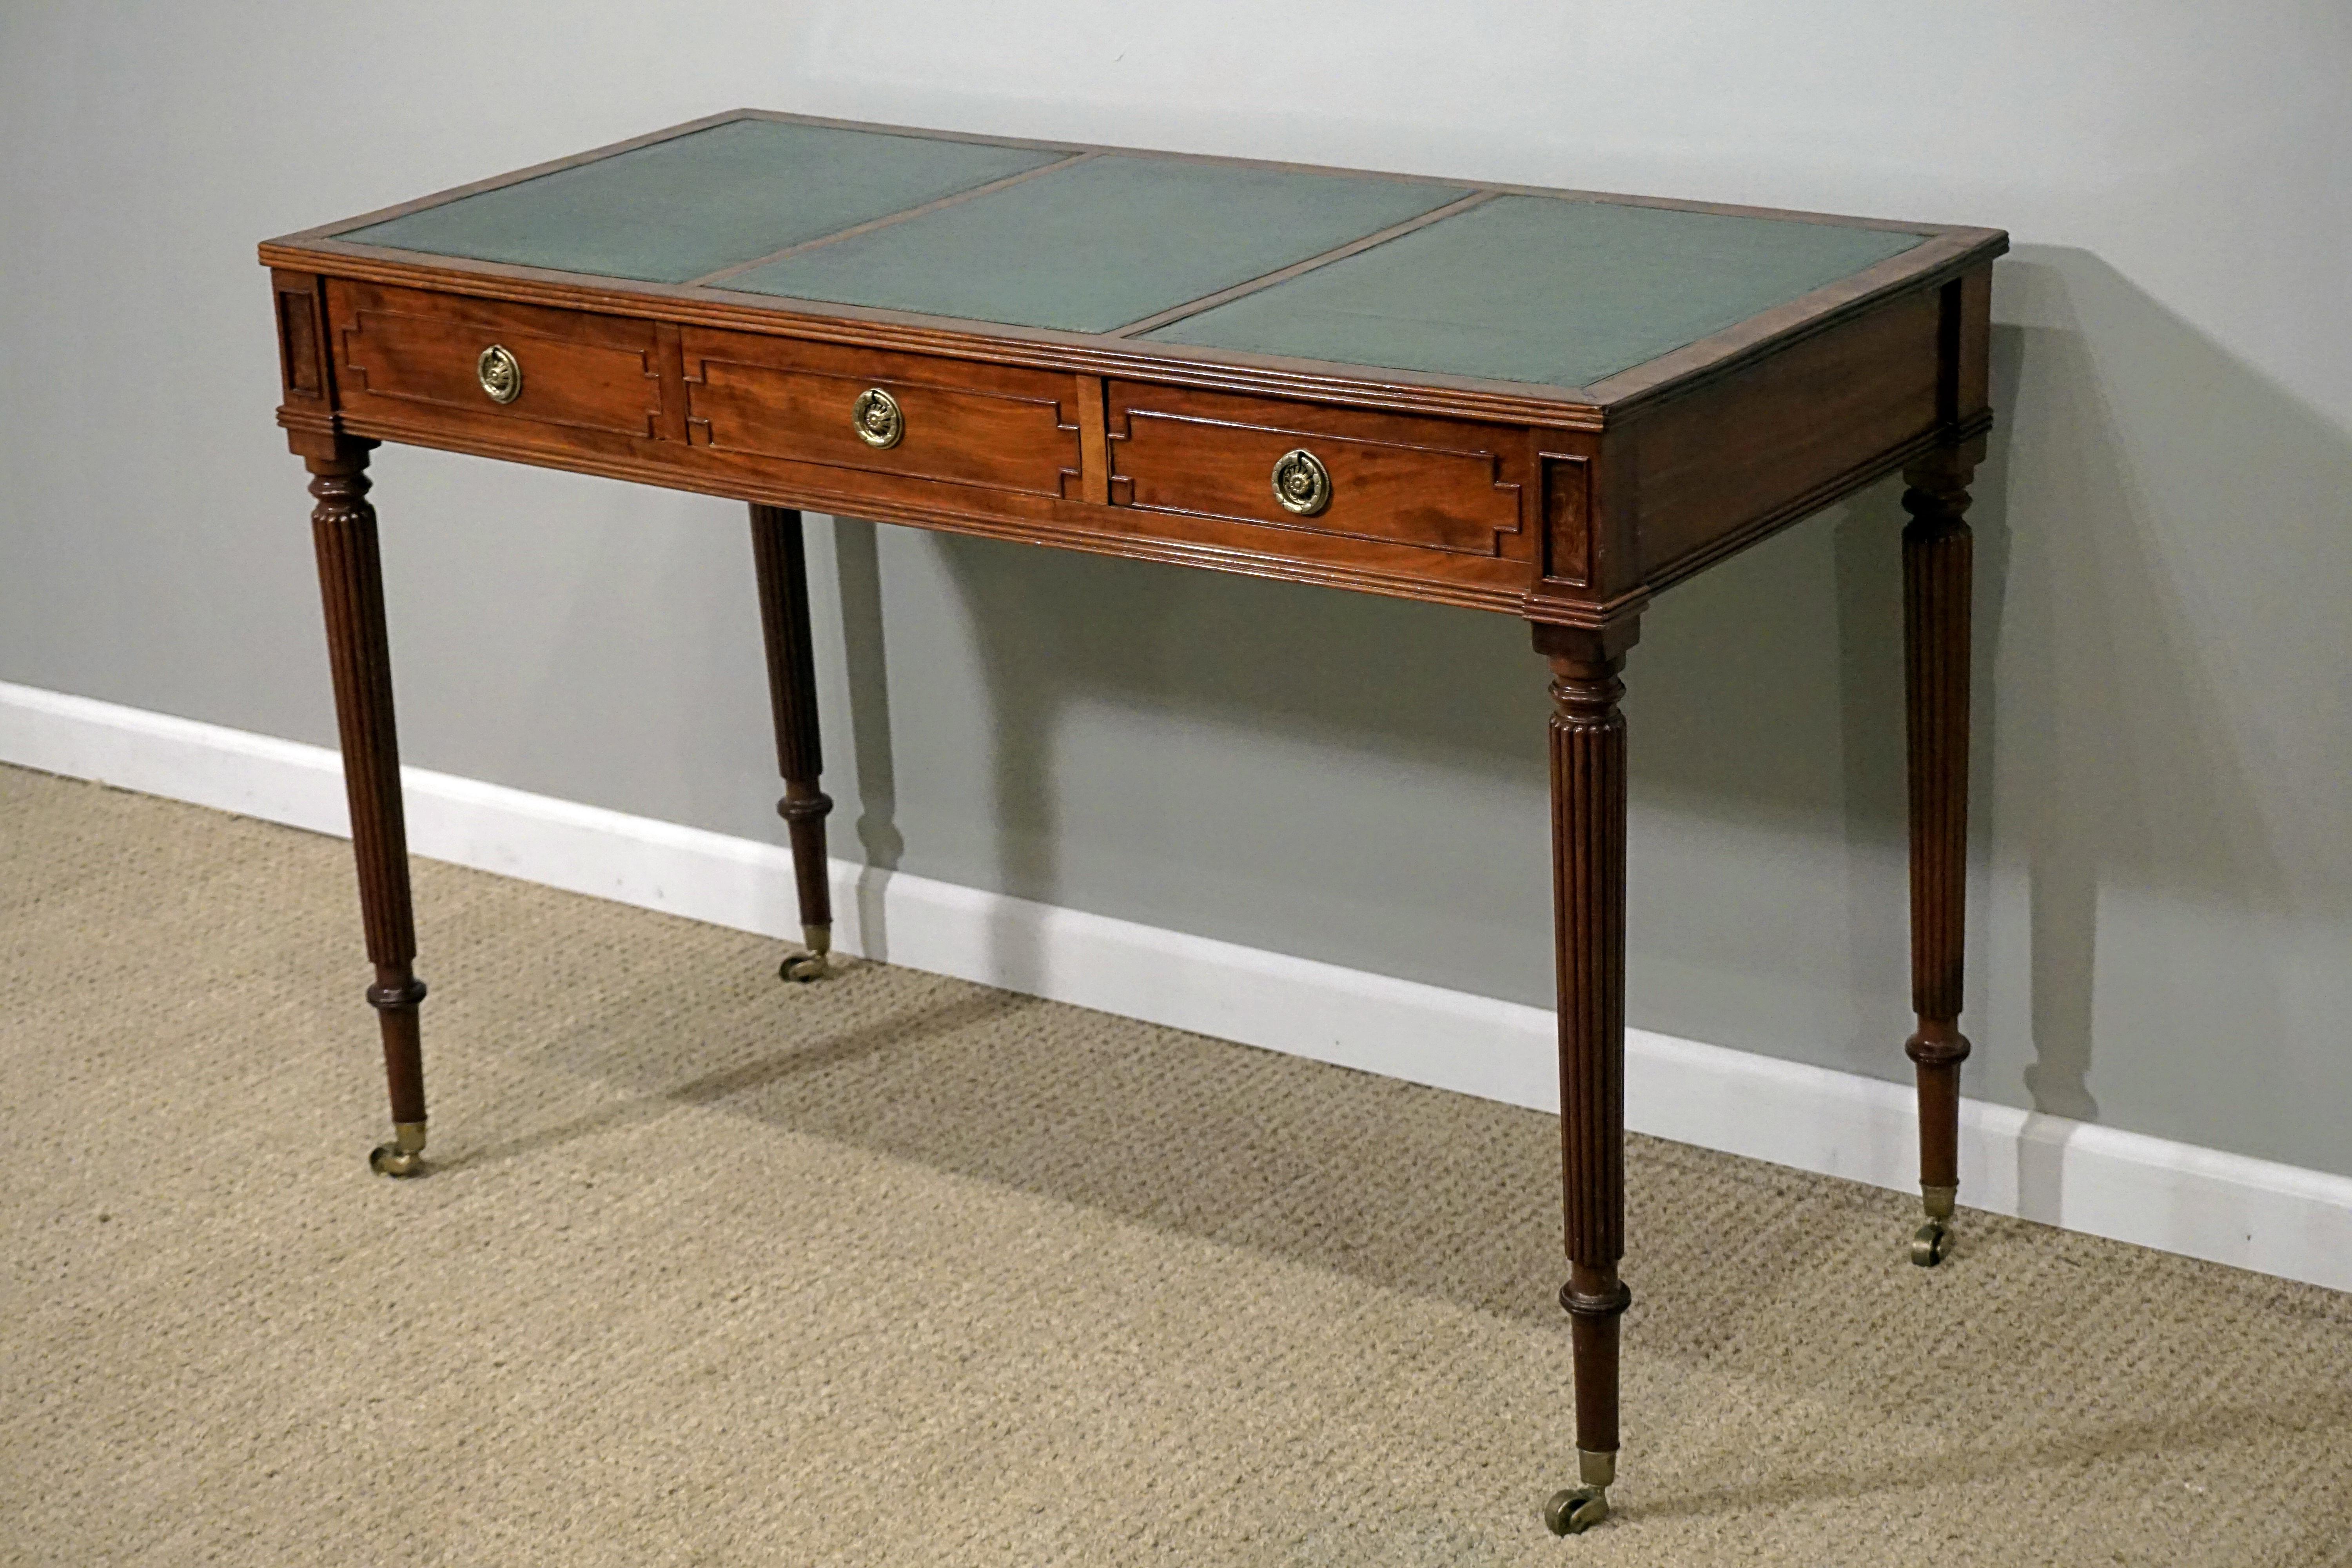 Regency mahogany writing table with leather desktop and brass accents and castors.